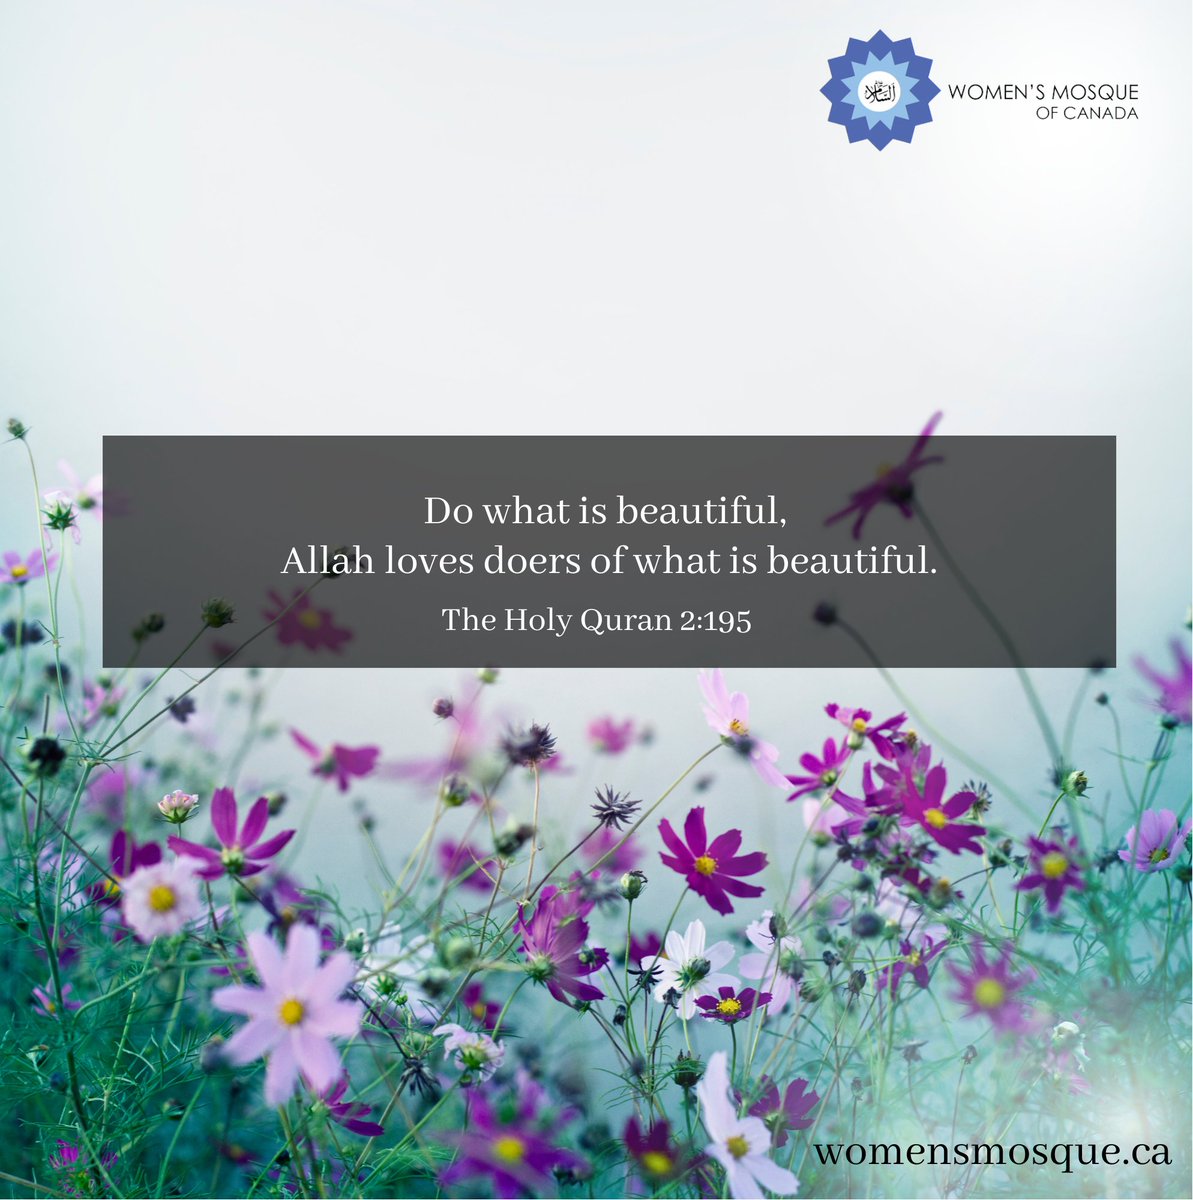 Do what is beautiful,
Allah loves doers of what is beautiful.
The Holy Quran 2:195
#nature #spirituality #religion #quran #quranquotes #quranquote #quranquotesdaily #quranverses #quranverse #quranverseoftheday